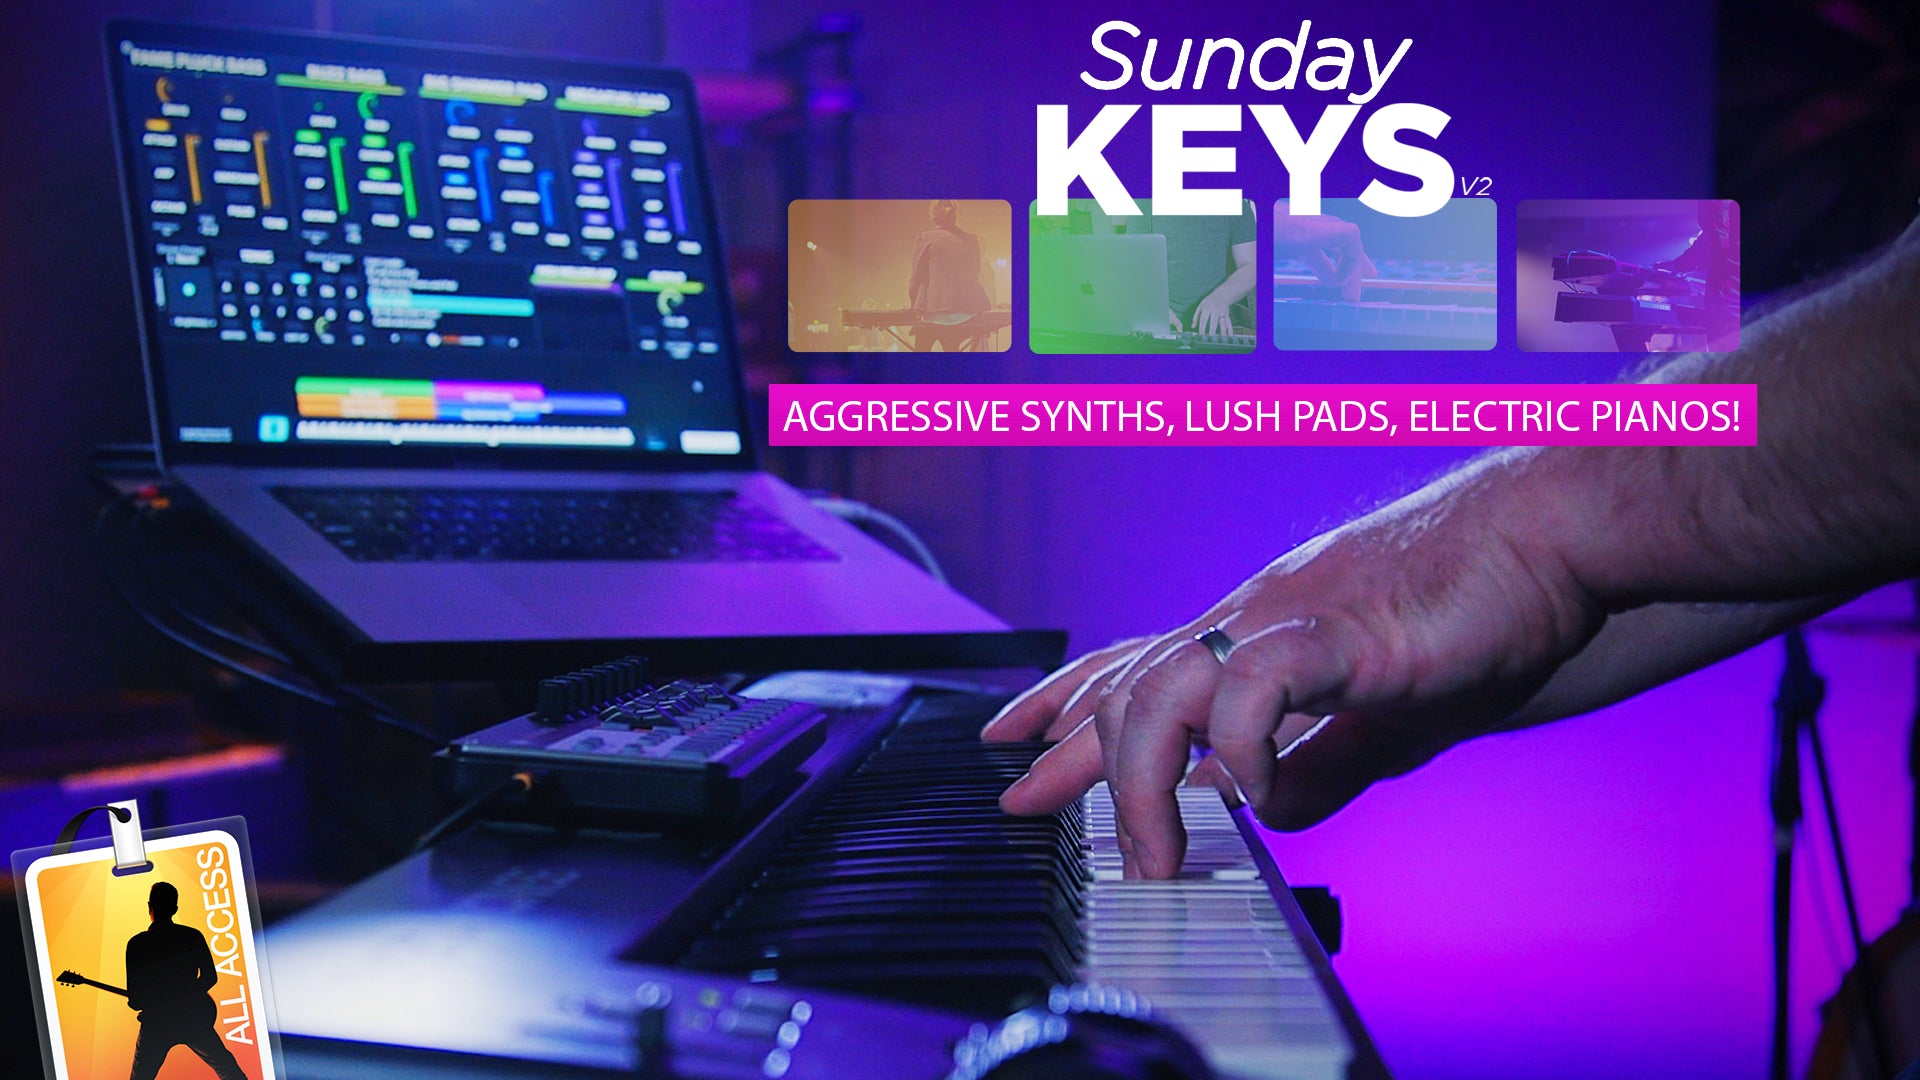 Aggressive Synths, Lush Pads, Electric Pianos Layered Worship Patches Demo - Sunday Keys Version 2